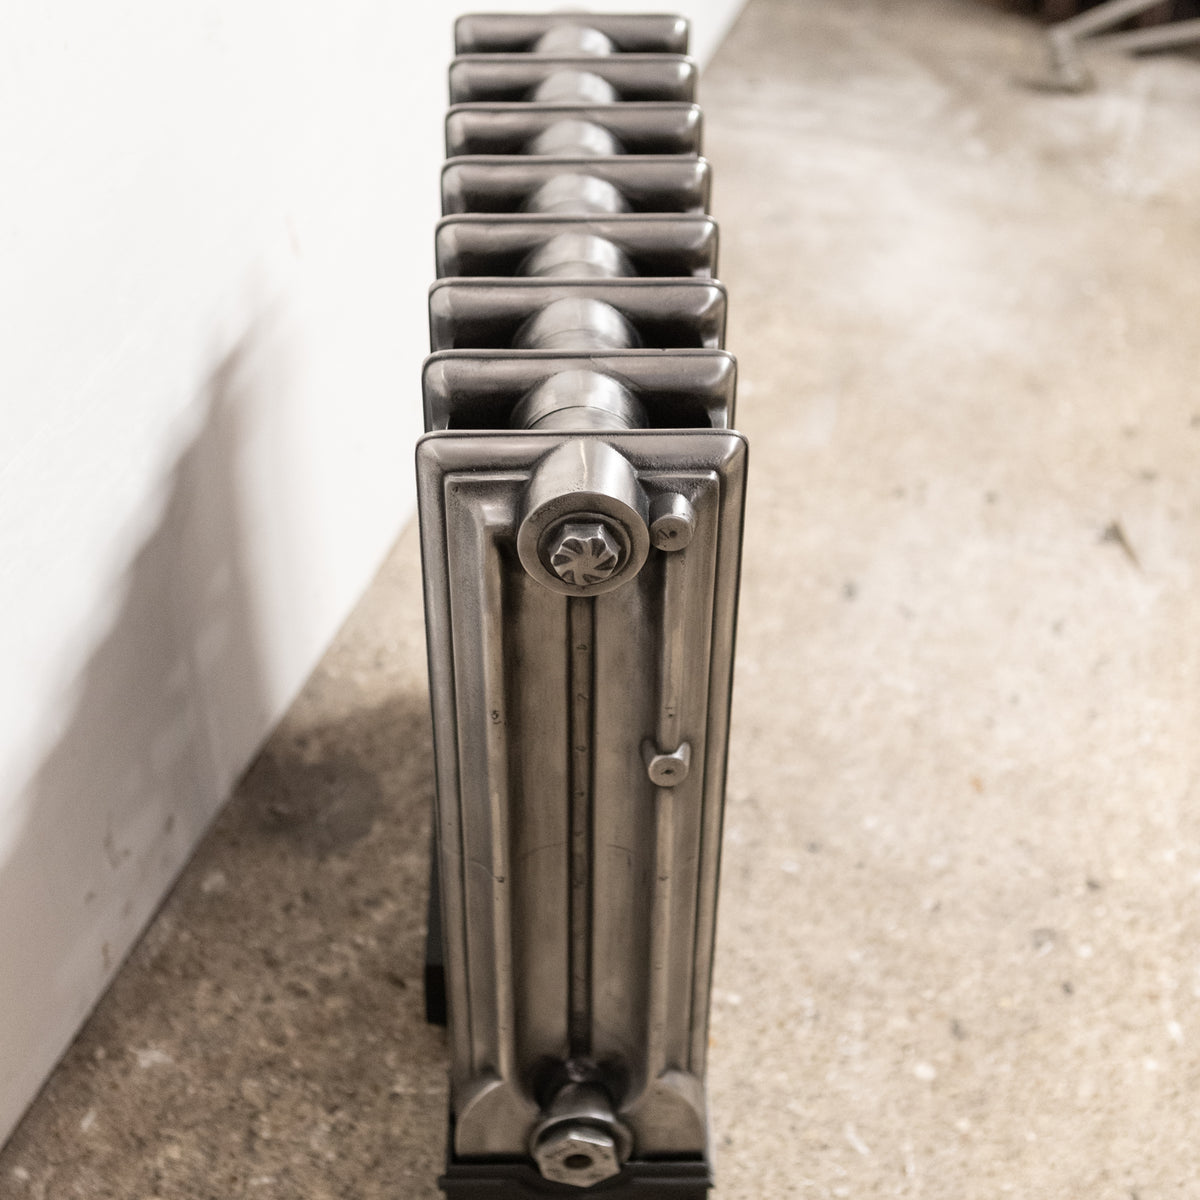 Rare Art Deco Cast Iron Radiator Reclaimed from Mercers Hall | The Architectural Forum